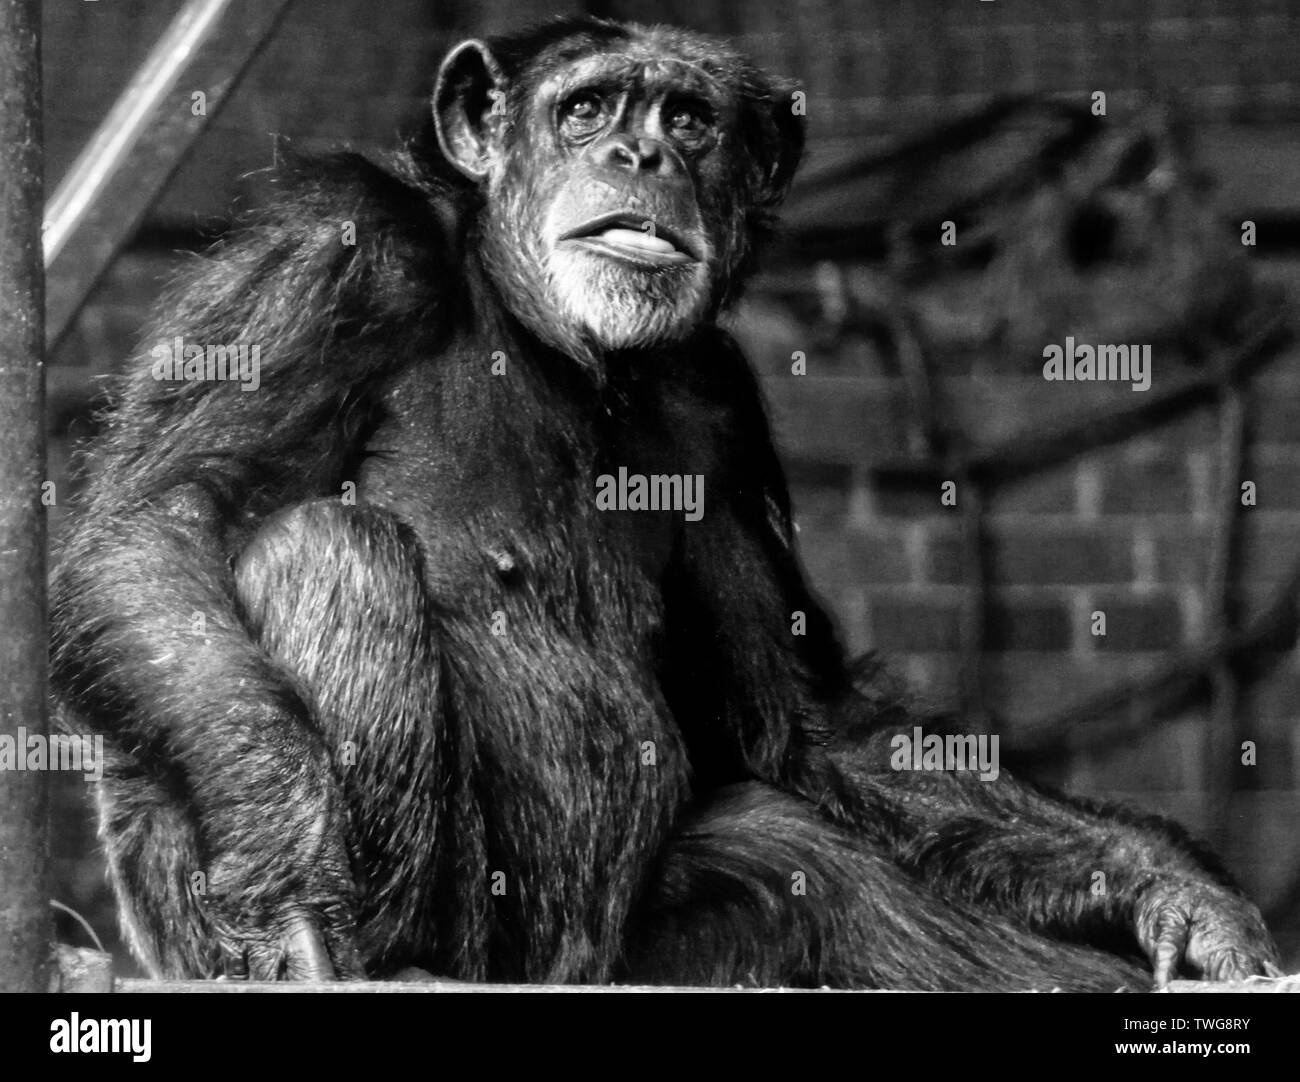 Zoo Animals and wildlife in Cheshire credit Ian Fairbrother/Alamy Stock Photos Stock Photo